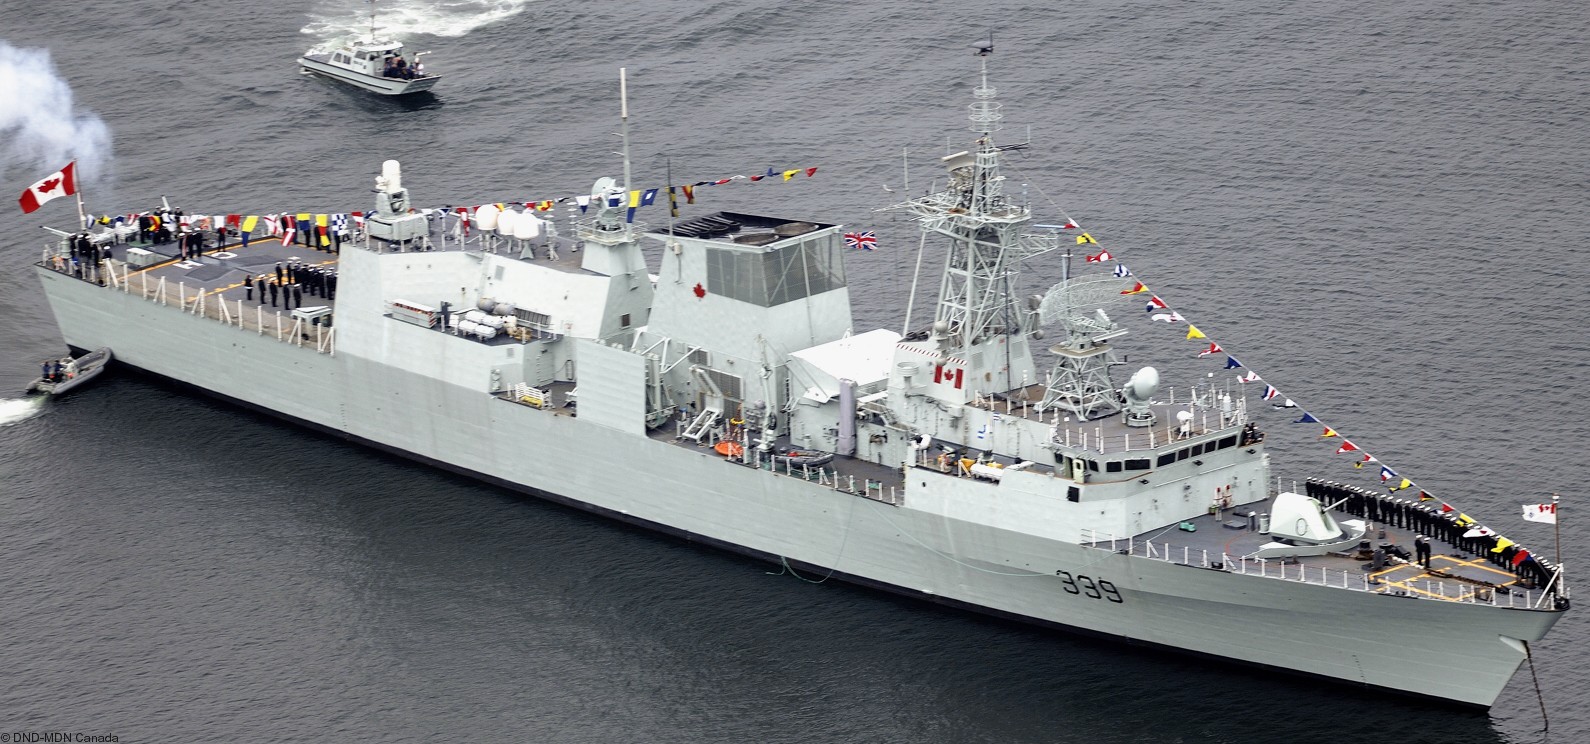 ffh-339 hmcs charlottetown halifax class helicopter patrol frigate ncsm royal canadian navy 32